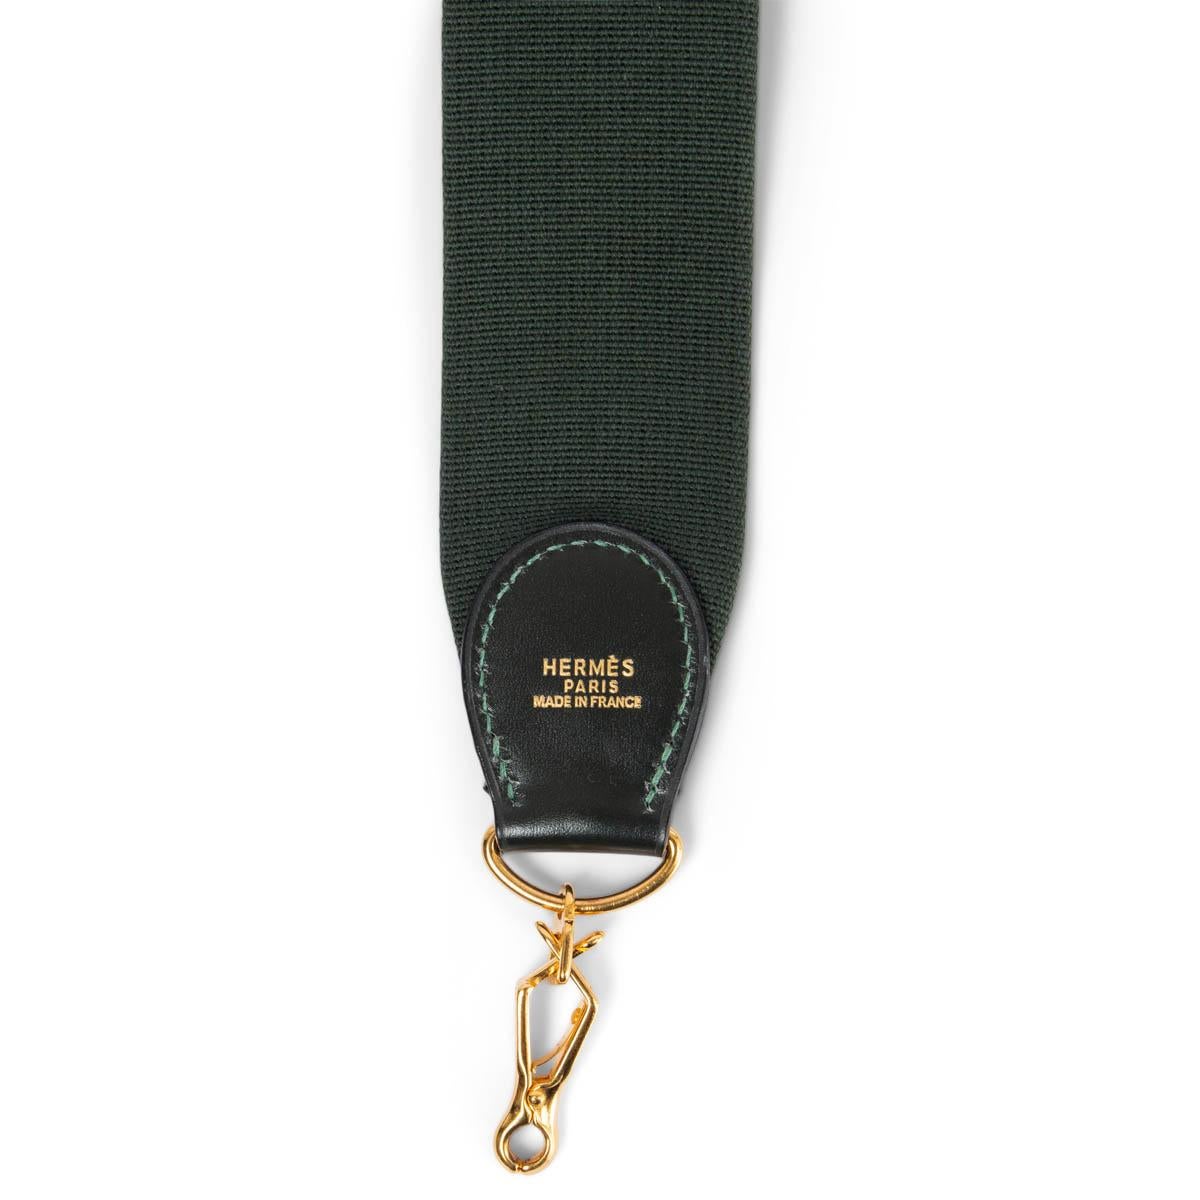 100% authentic Hermès shoulder strap for your Kelly or Evelyne bag in Vert Fonce (dark green) canvas and Box leather. Has been carried with a few brown spots on the canvas. Overall in good condition. 

Measurements
Width	5cm (2in)
Length	110cm